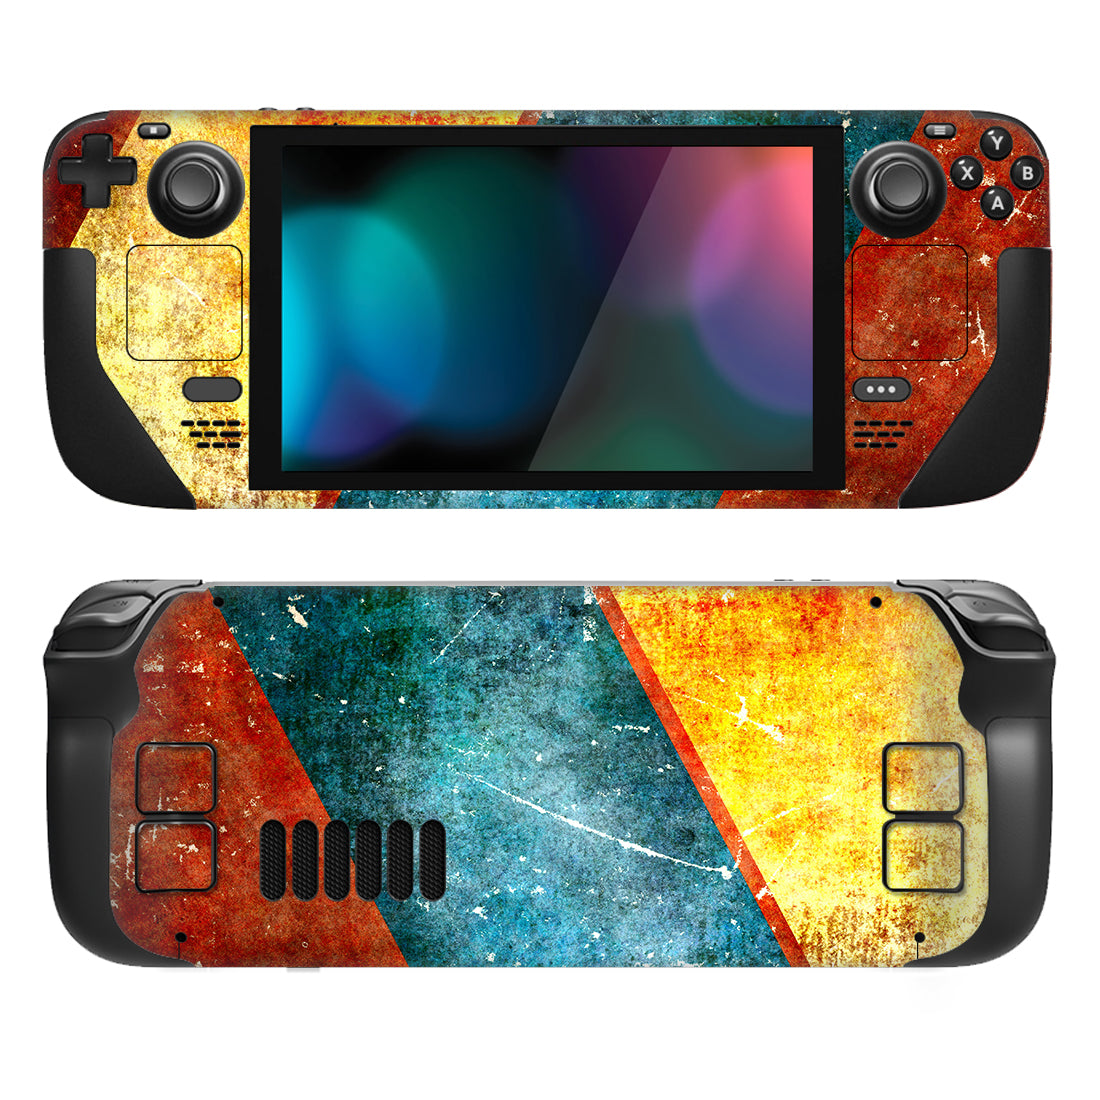 PlayVital Full Set Protective Skin Decal for Steam Deck, Custom Stickers Vinyl Cover for Steam Deck Handheld Gaming PC - Aging - SDTM048 PlayVital